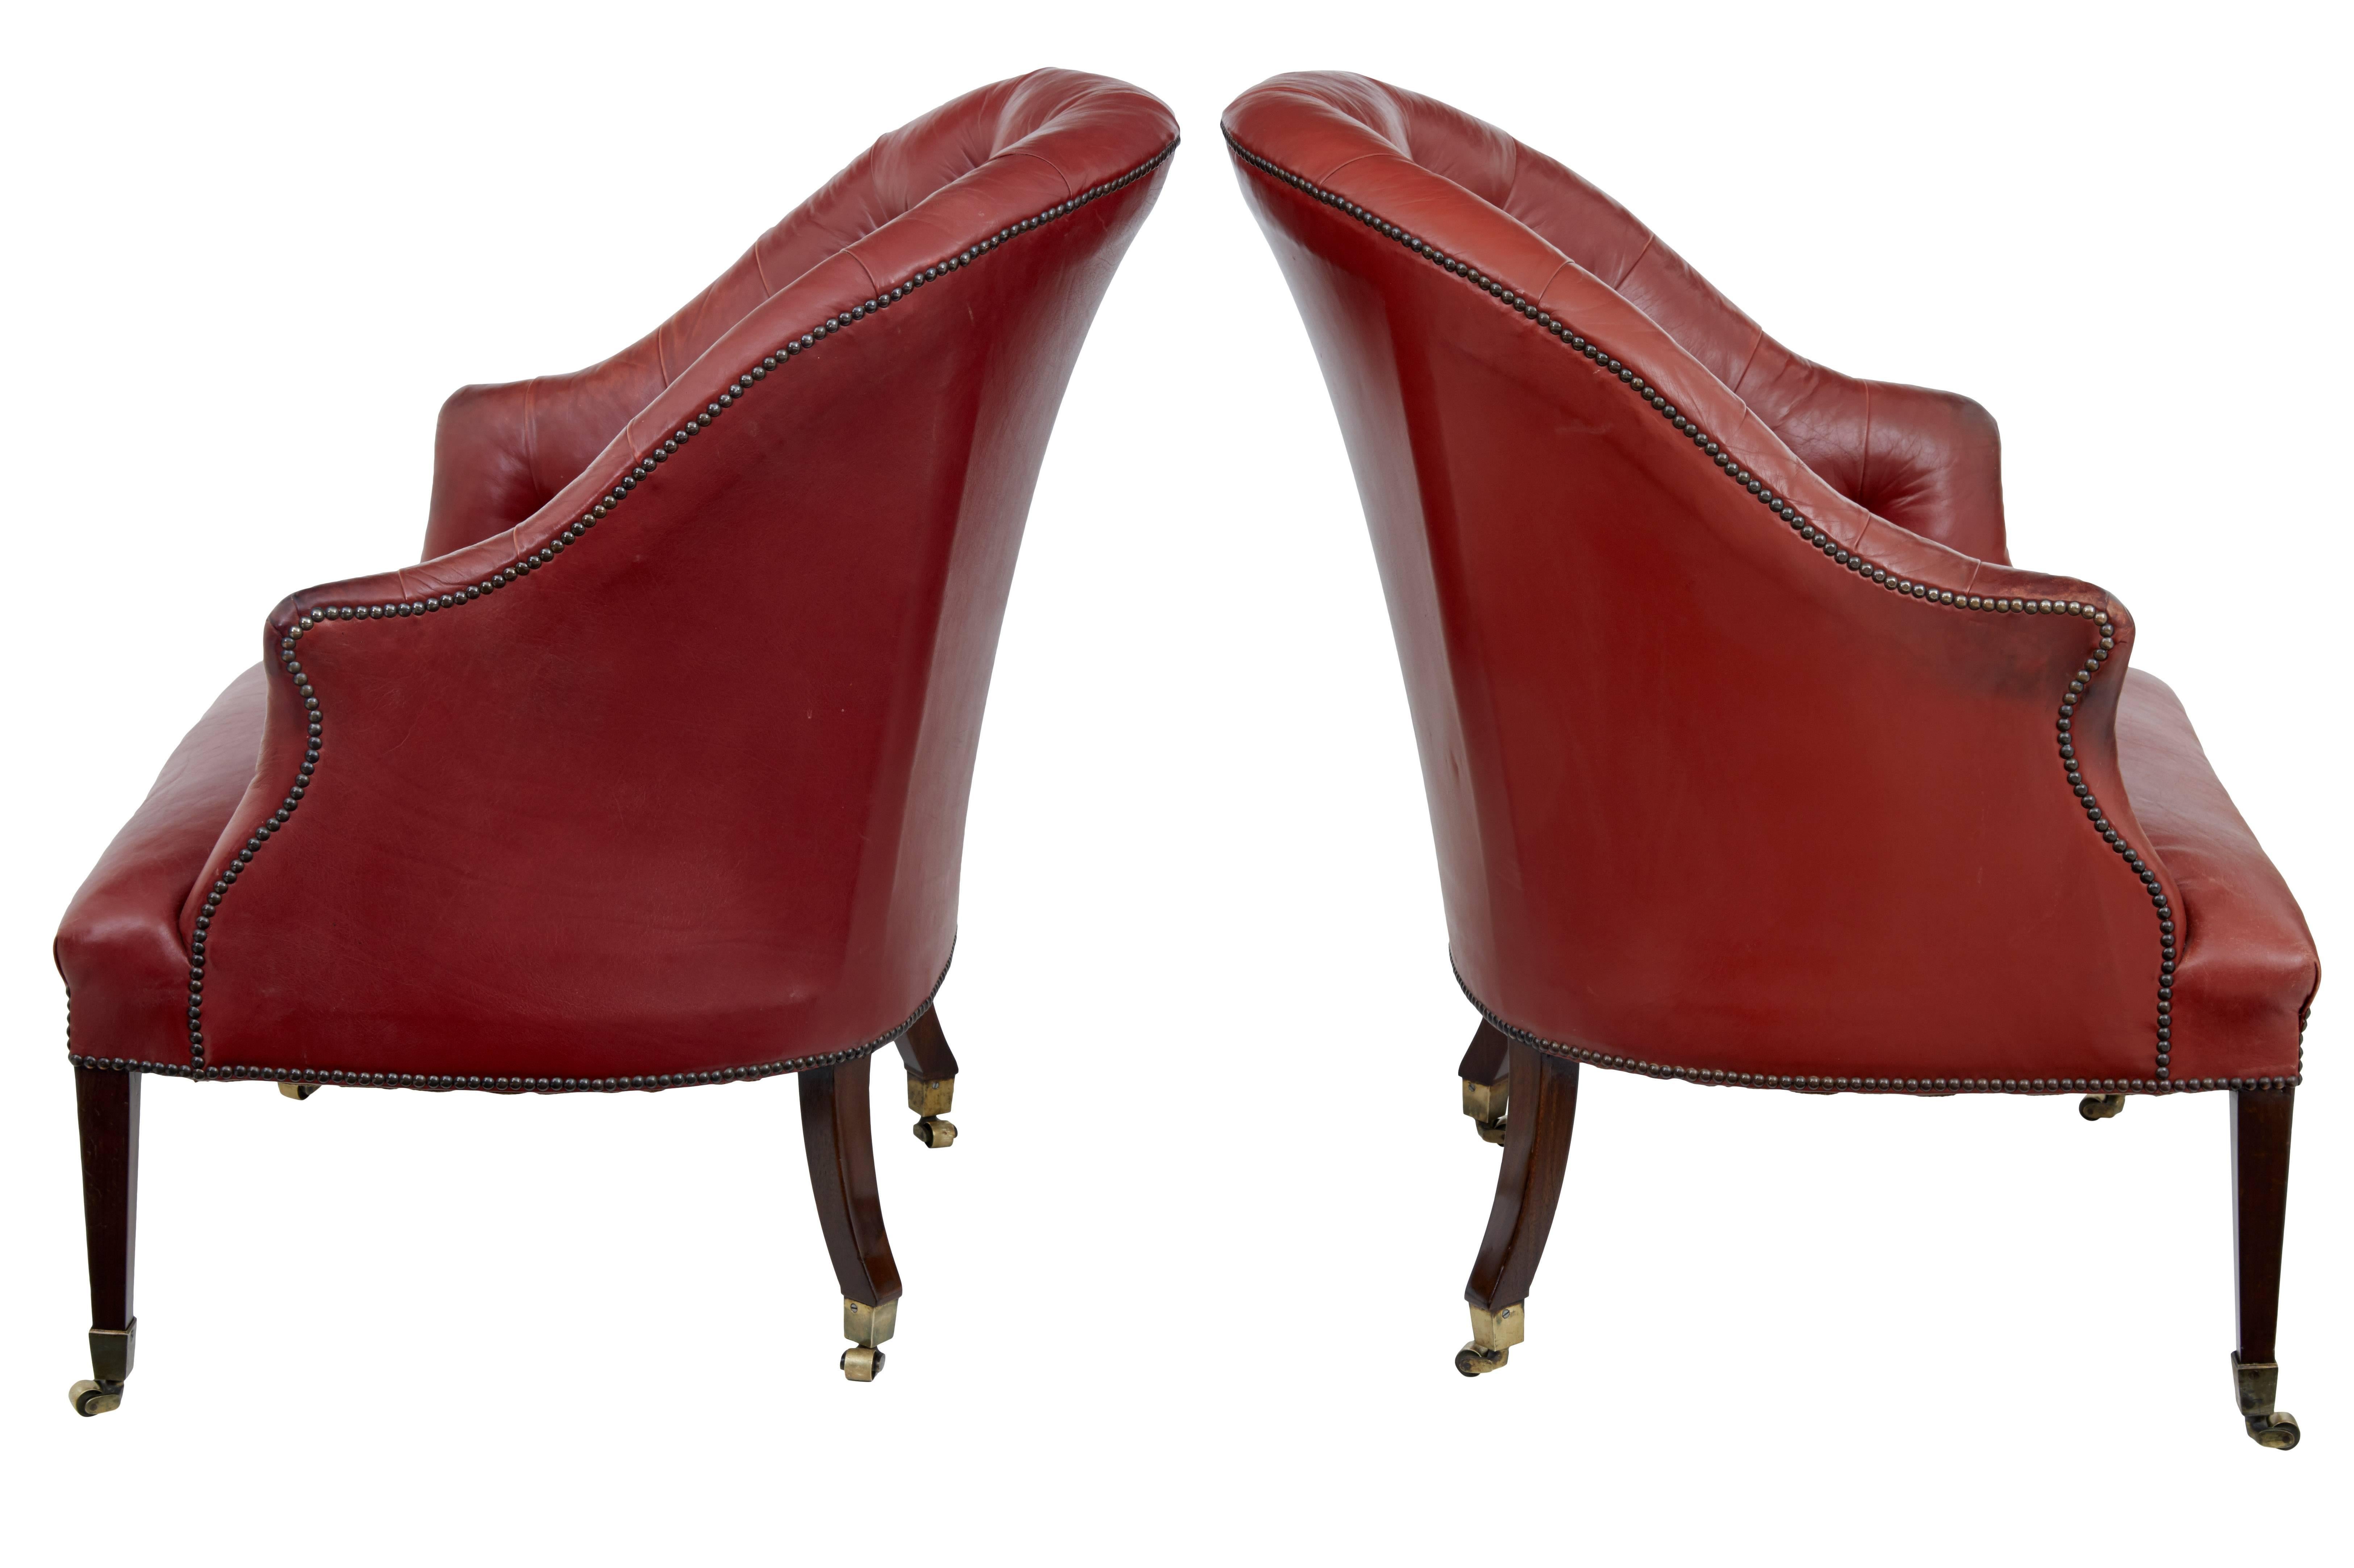 Fine quality pair of late 19th century leather lounge chairs, circa 1895

Excellent quality original button back red leather which is in fine condition for its age.
Superb proportions on these chairs, which have a wide seat.
Standing on mahogany